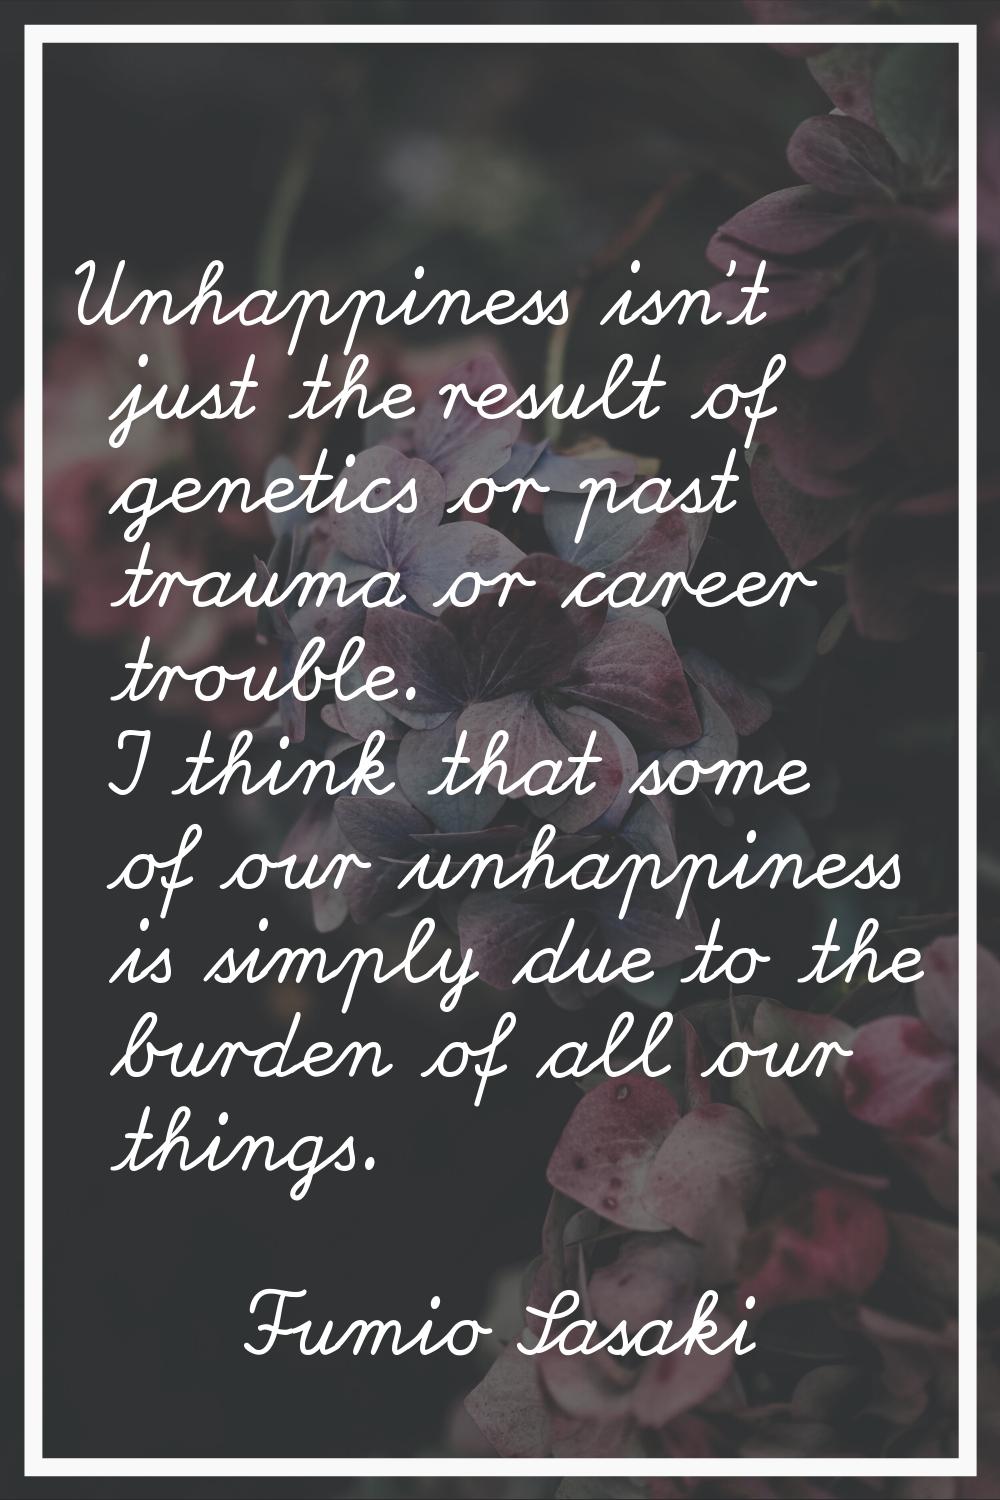 Unhappiness isn't just the result of genetics or past trauma or career trouble. I think that some o